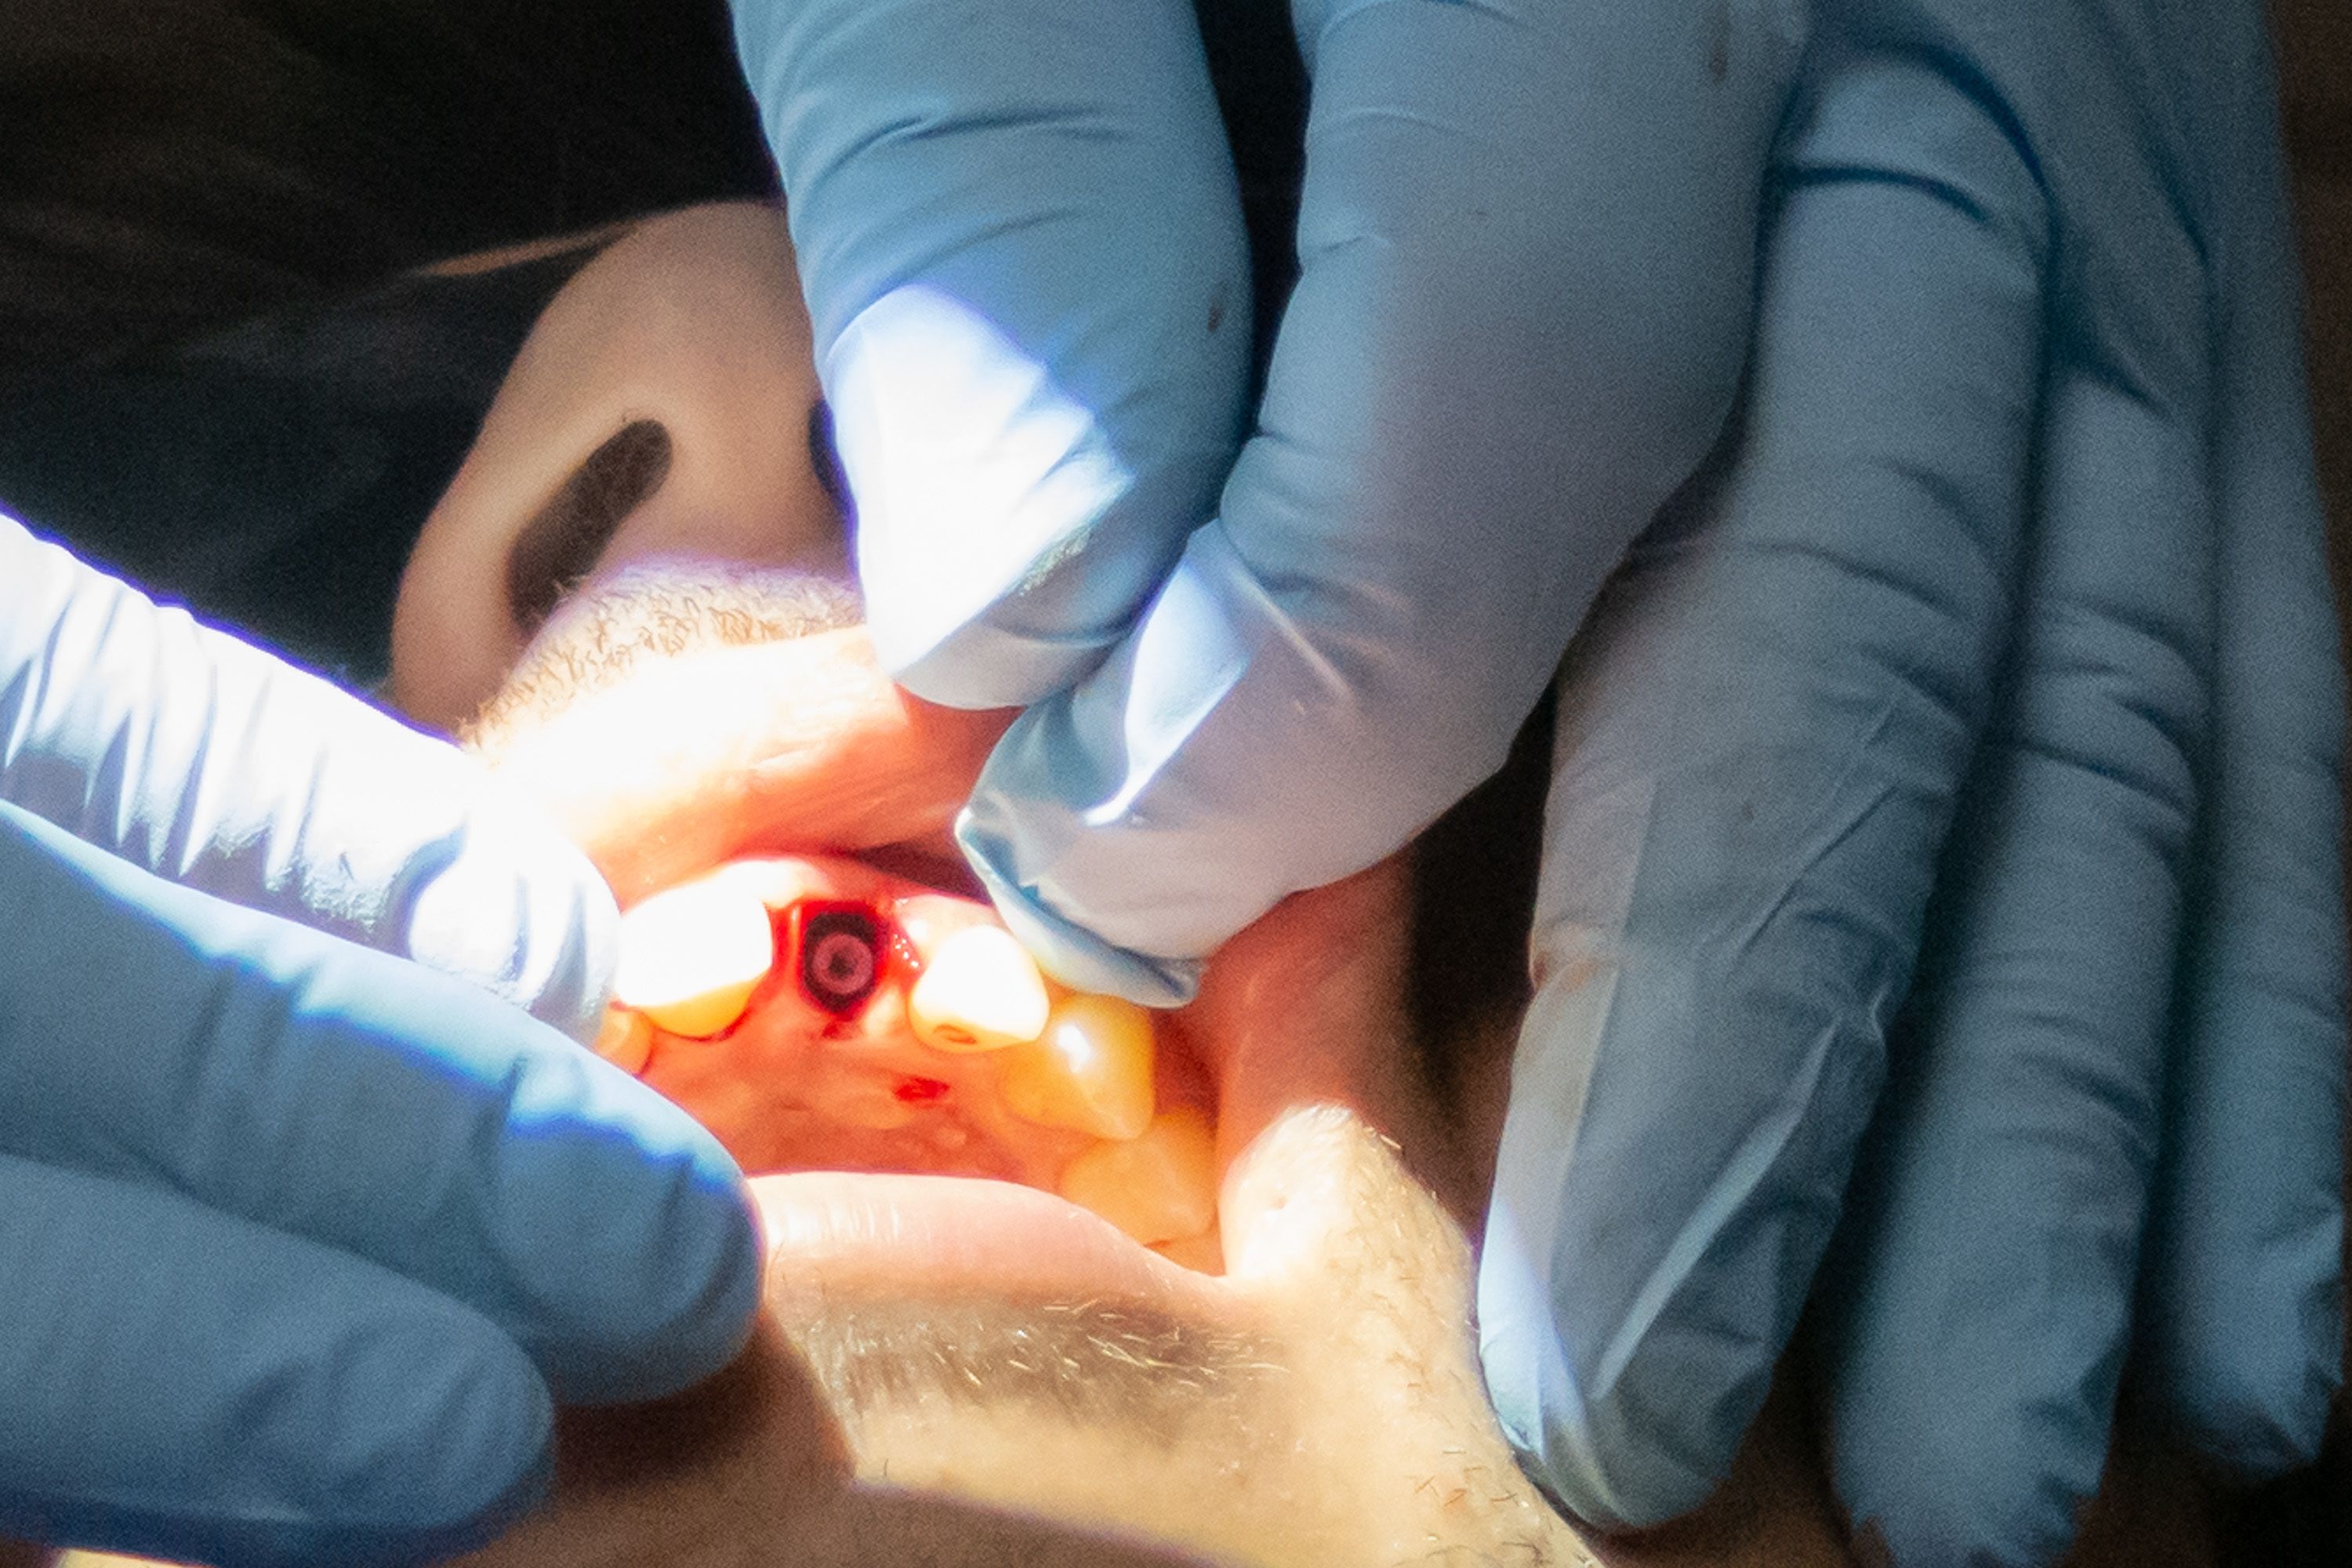 Final placement of dental implant